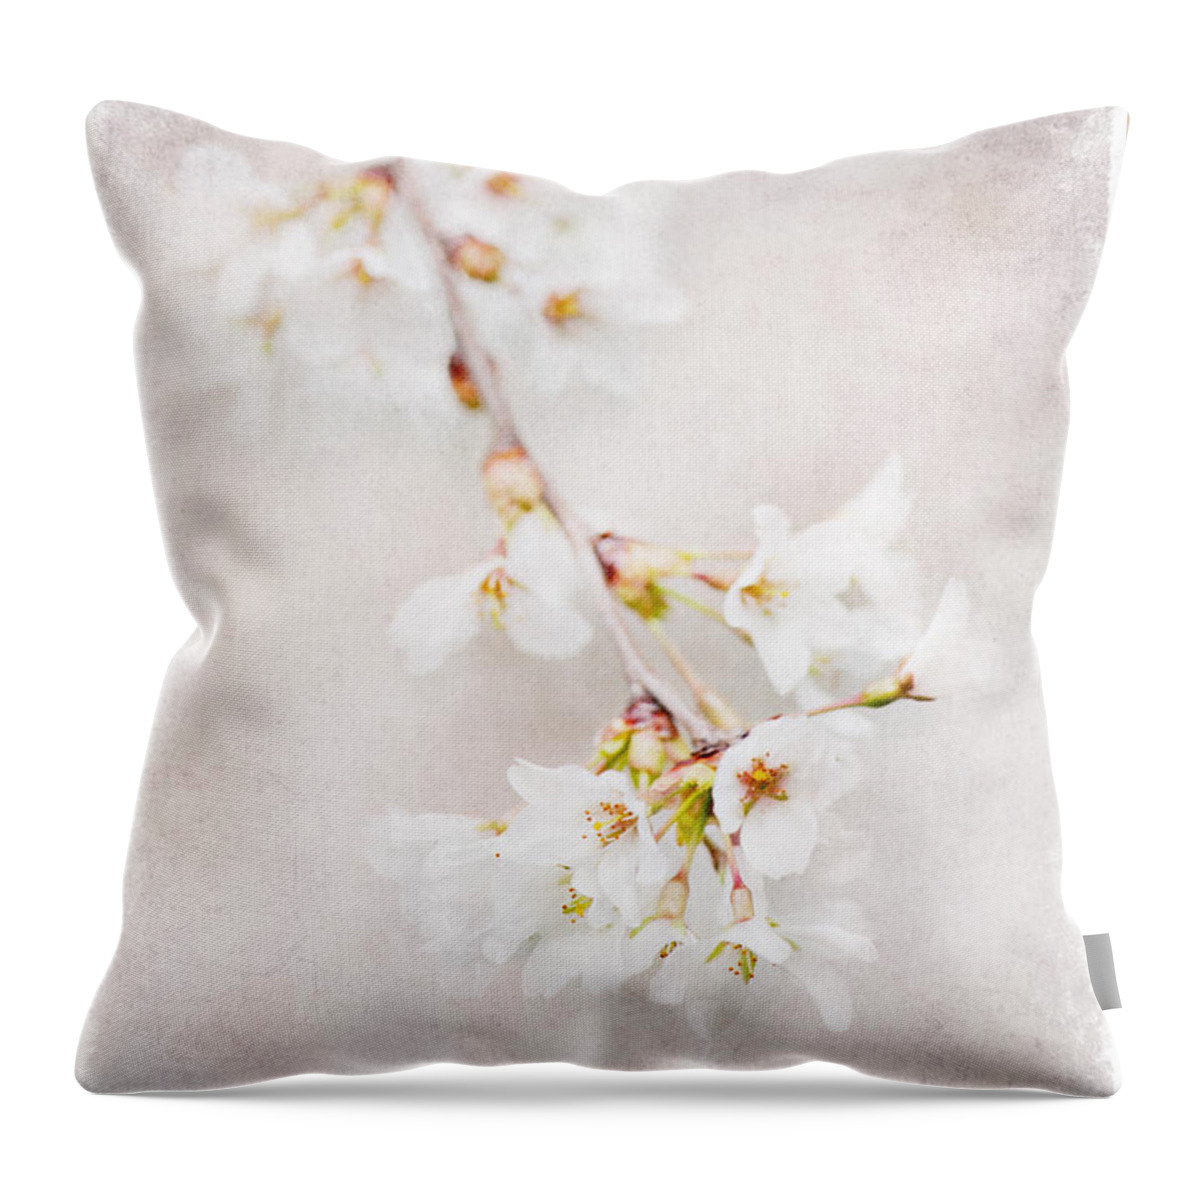 Flowers Throw Pillow featuring the photograph Triadelphia Cherry Blossoms by Jill Love